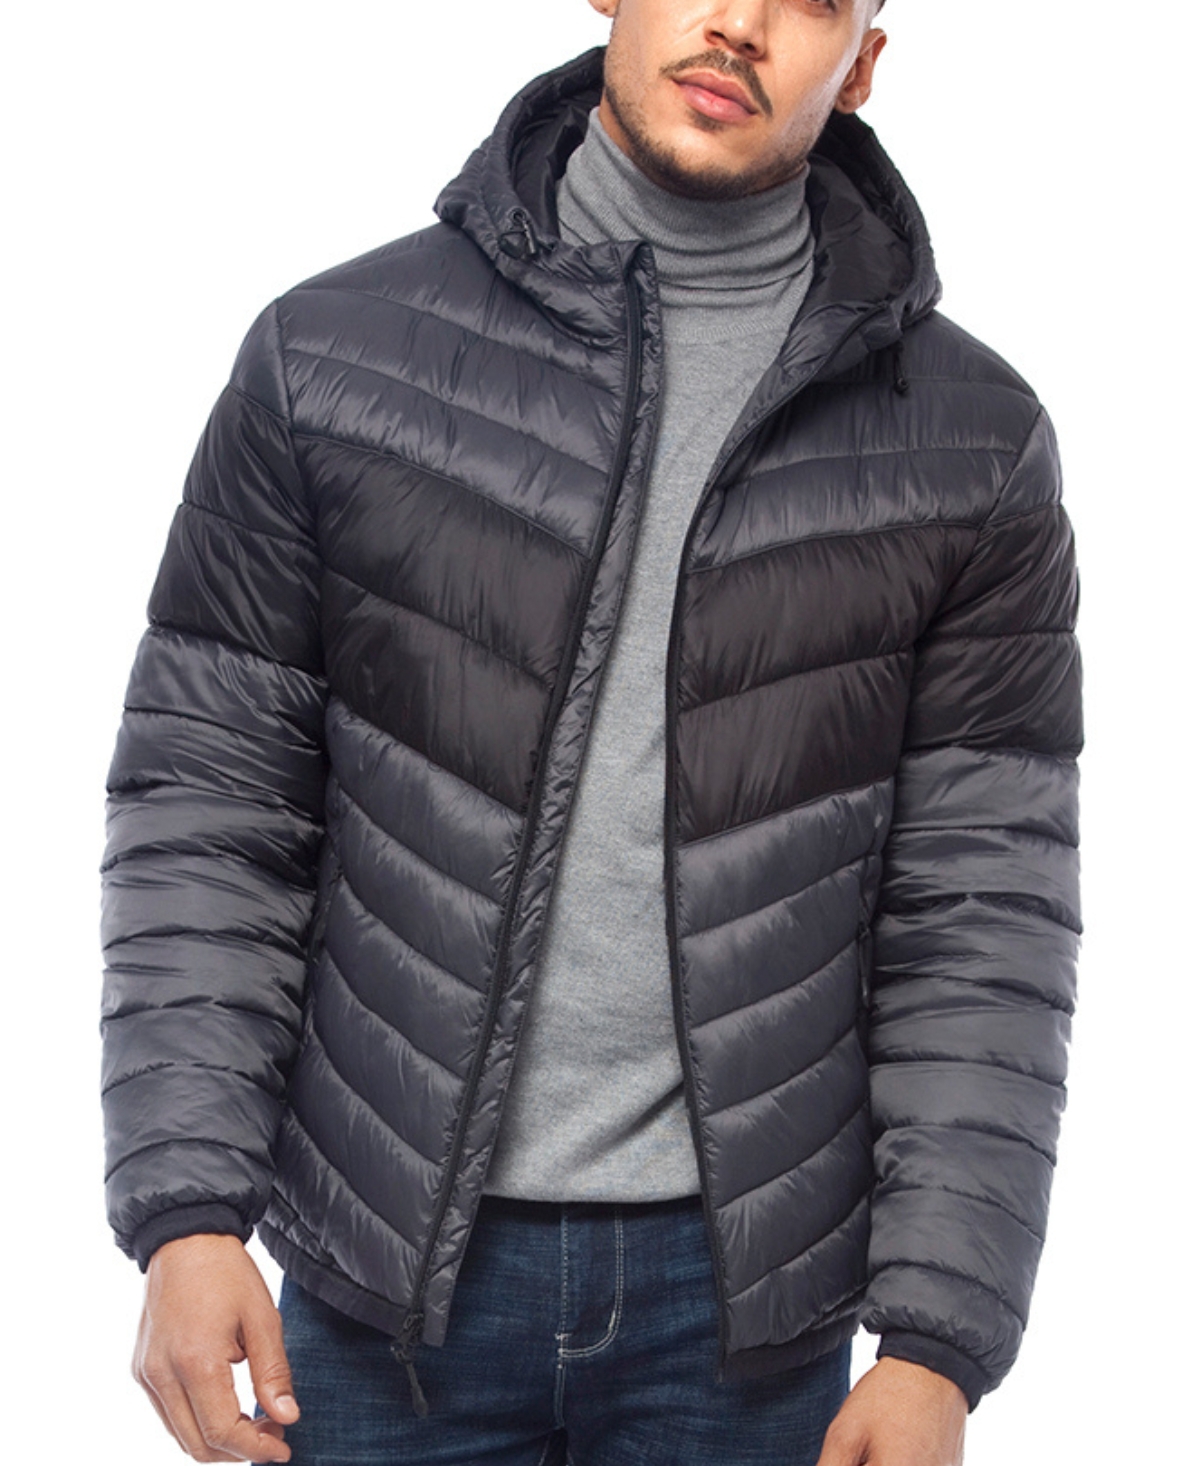 Men's Light Weight Quilted Hooded Puffer Jacket Coat - Navy